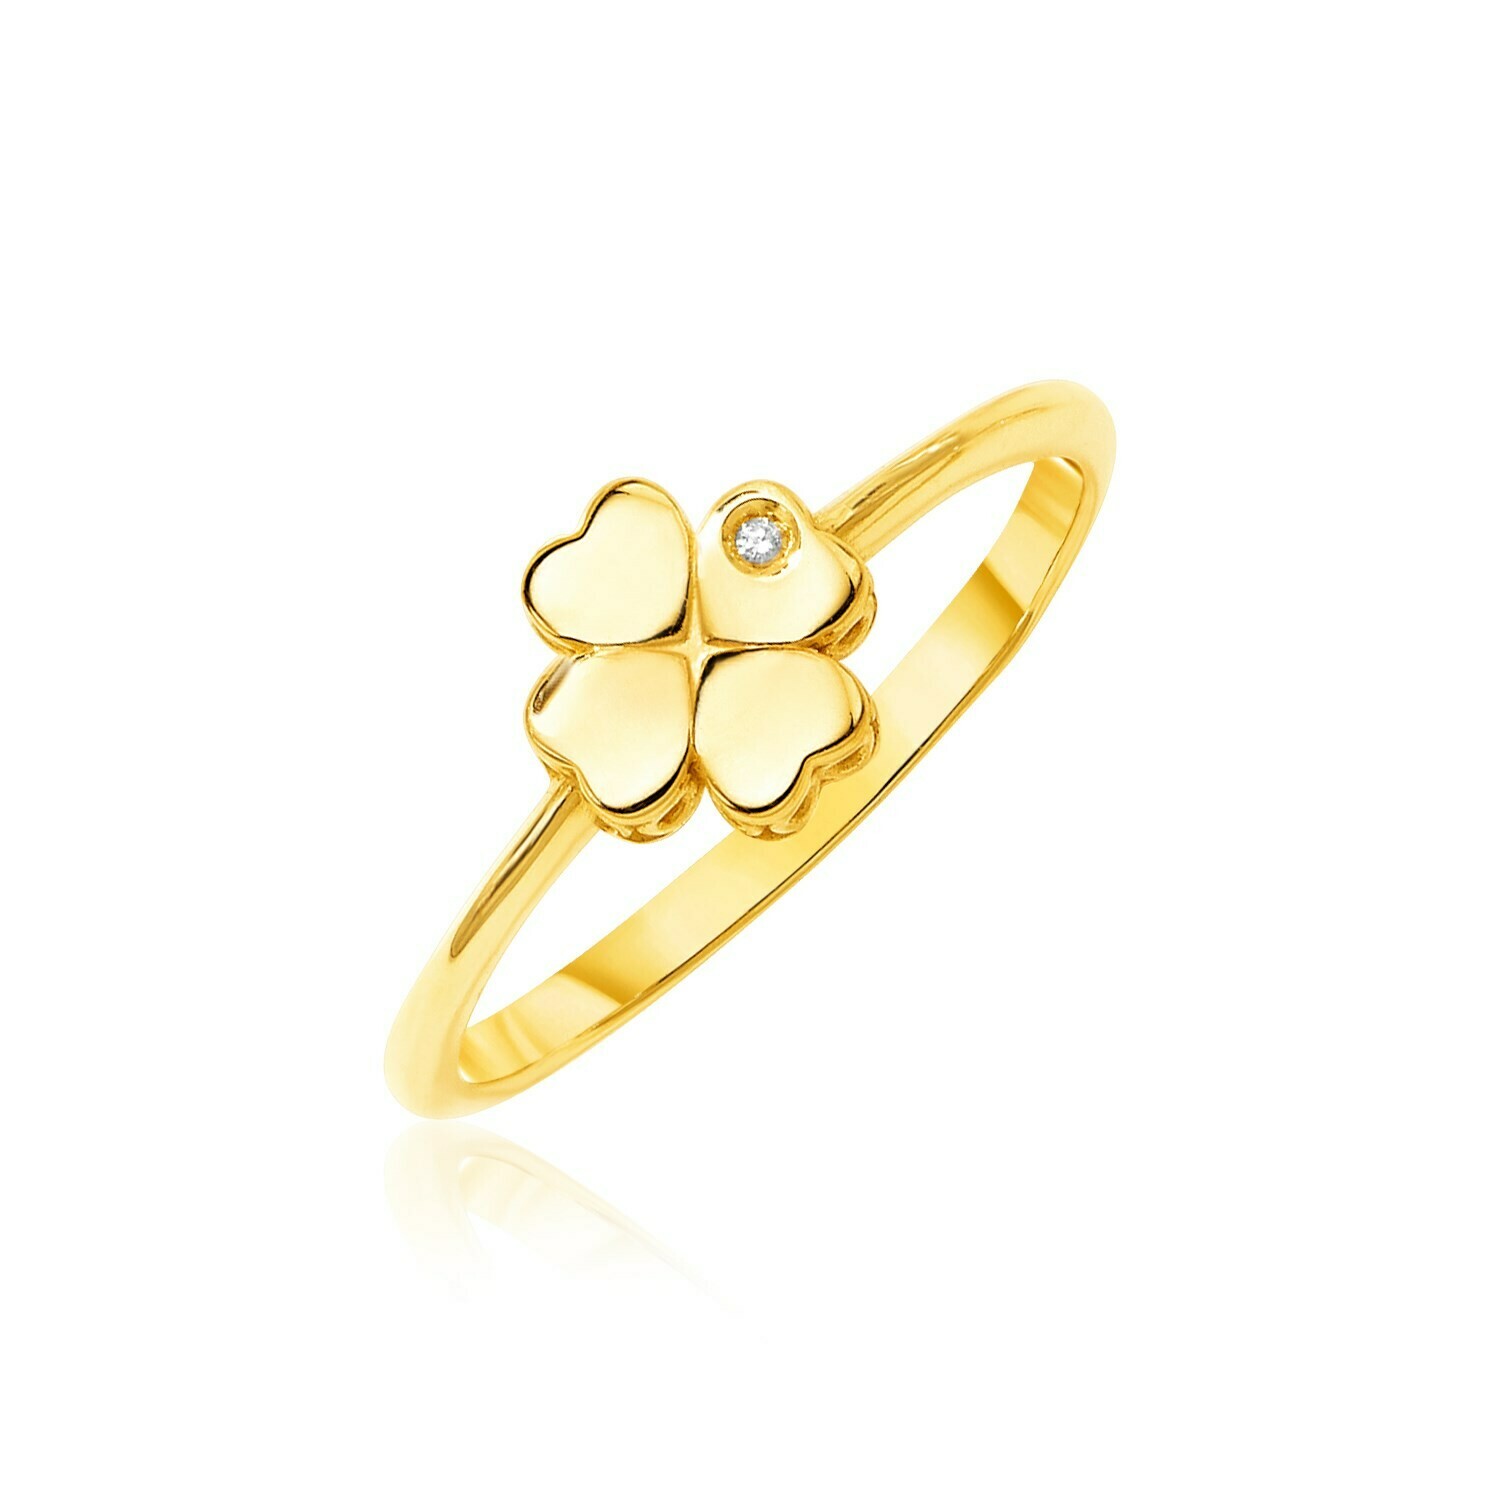 14k Yellow Gold Polished Four Leaf Clover Ring with Diamond